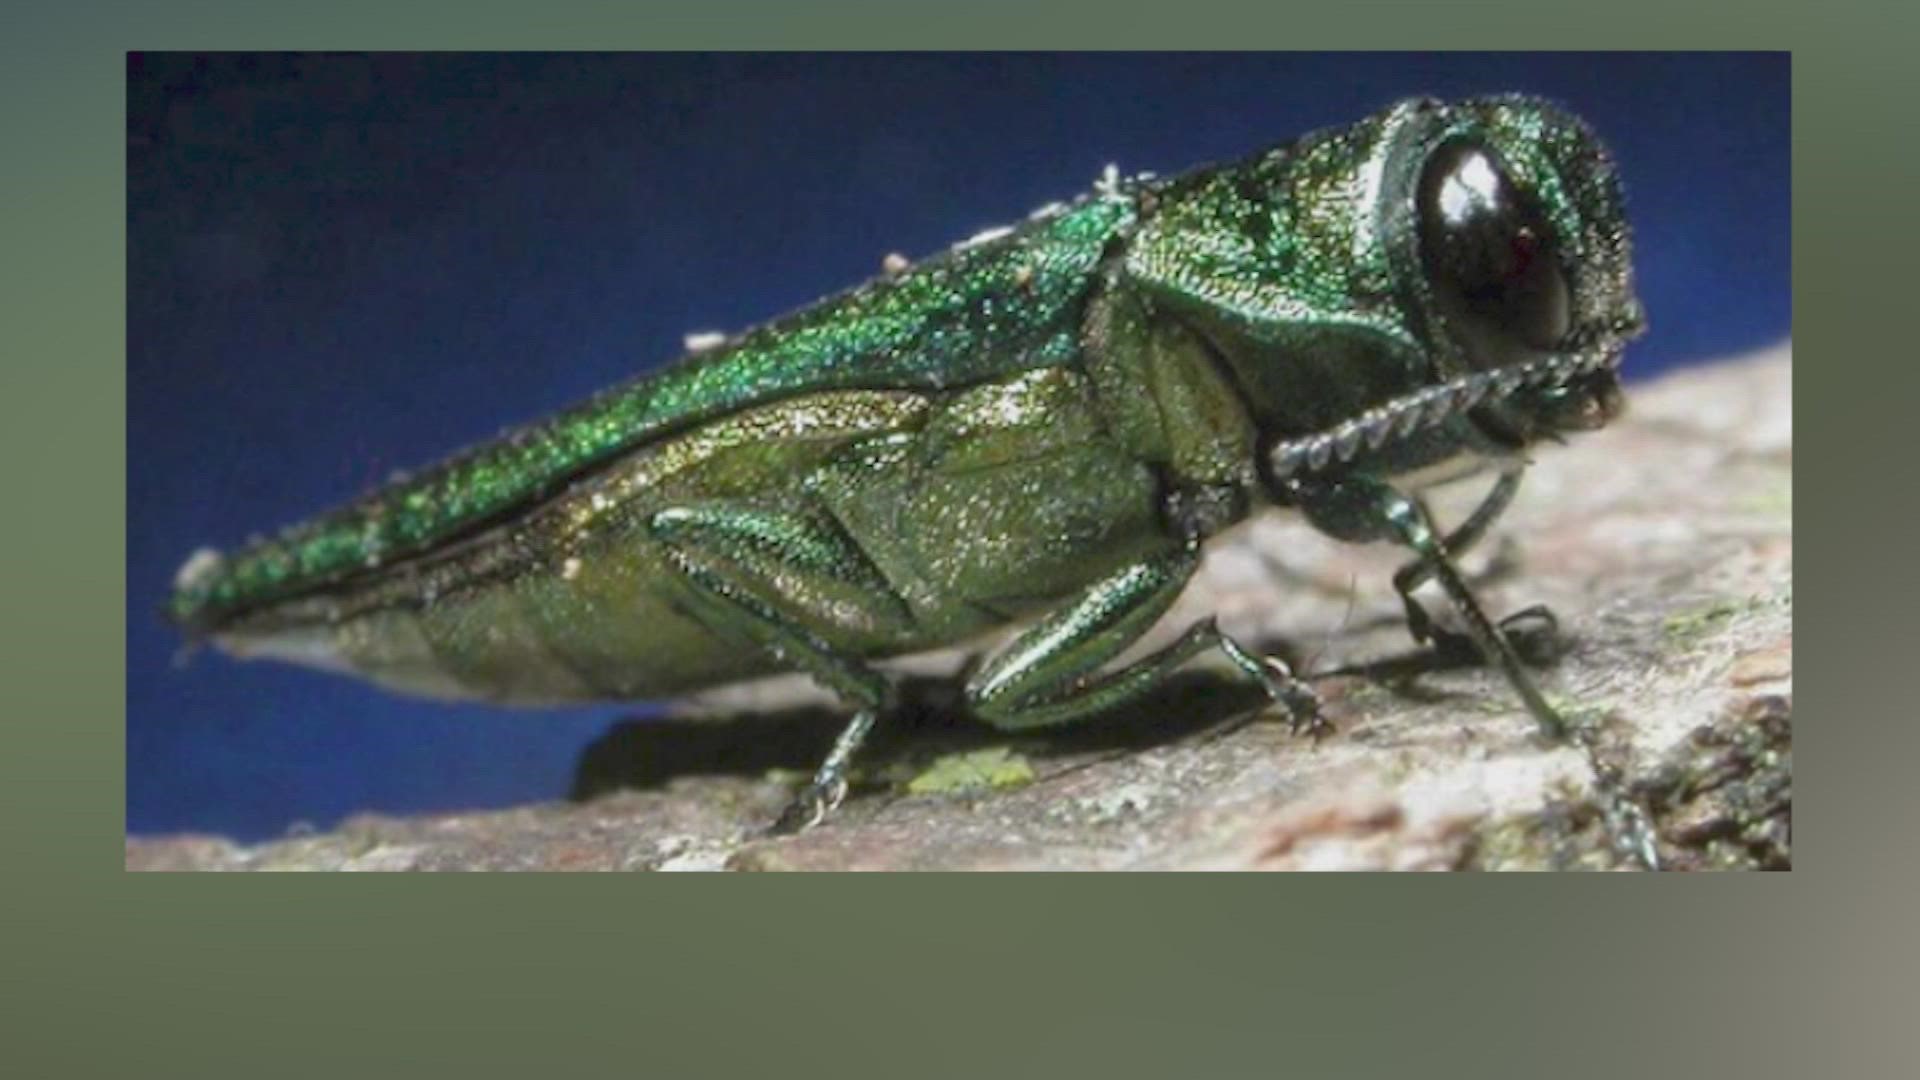 "Once emerald ash borer really gets into an area and affects the tree, it's going to be dead within two to three years if it's not treated," said Brett Johnson.